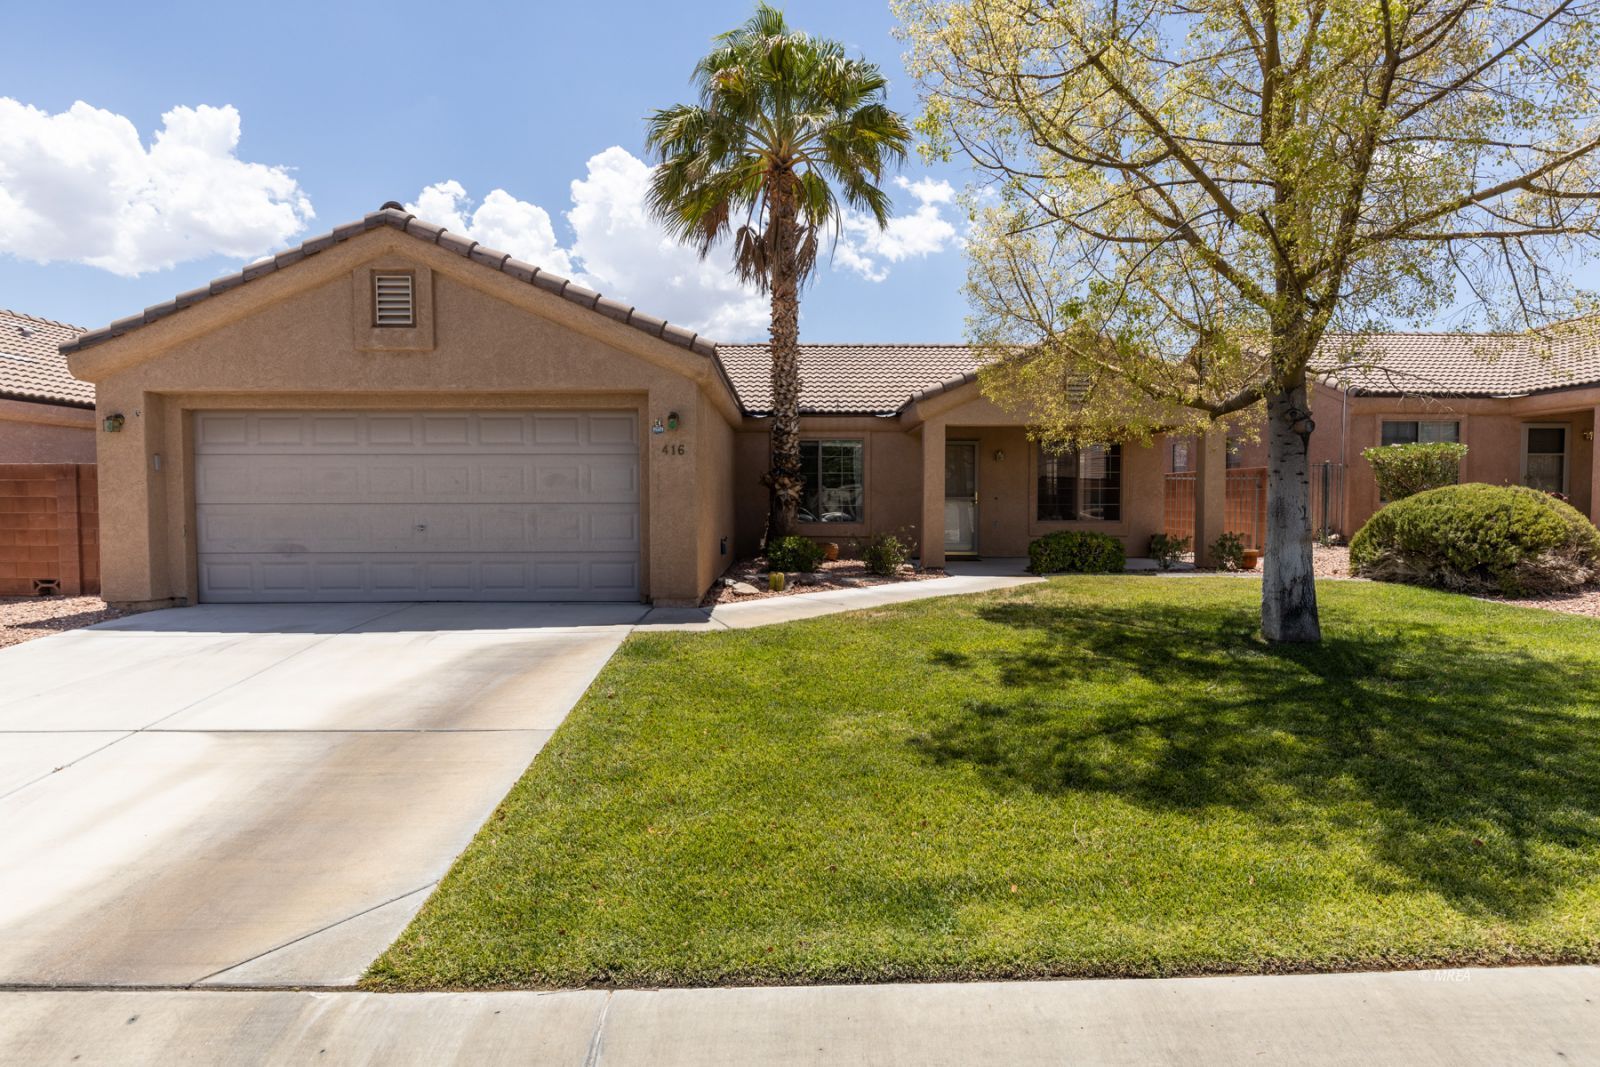 416 Silver Rd , Mesquite NV 89027